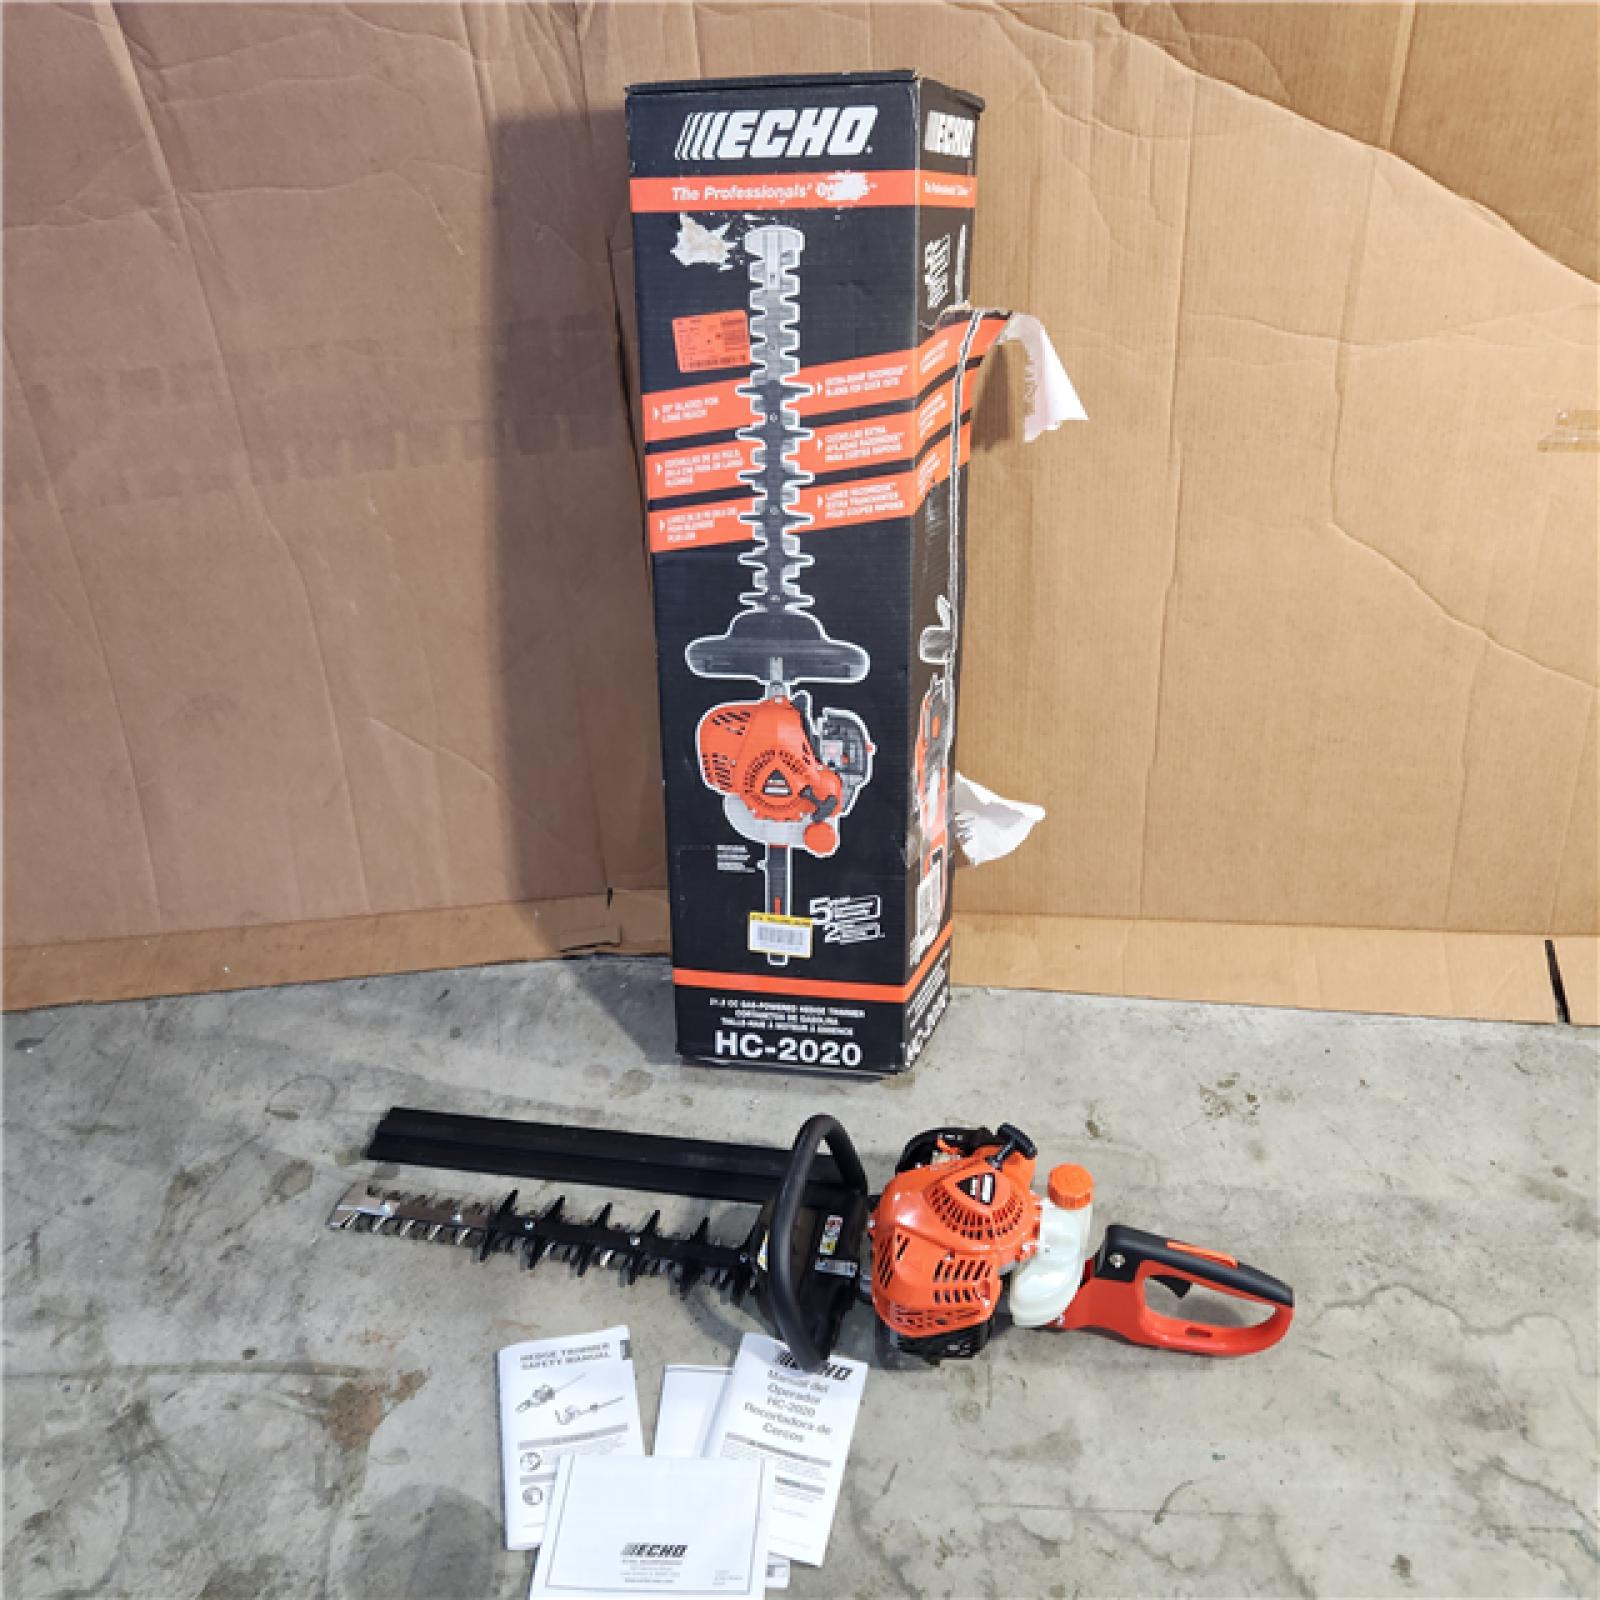 Houston location- AS-IS Echo 20 21.2cc Hedgetrimmer ( Appears in good condition)